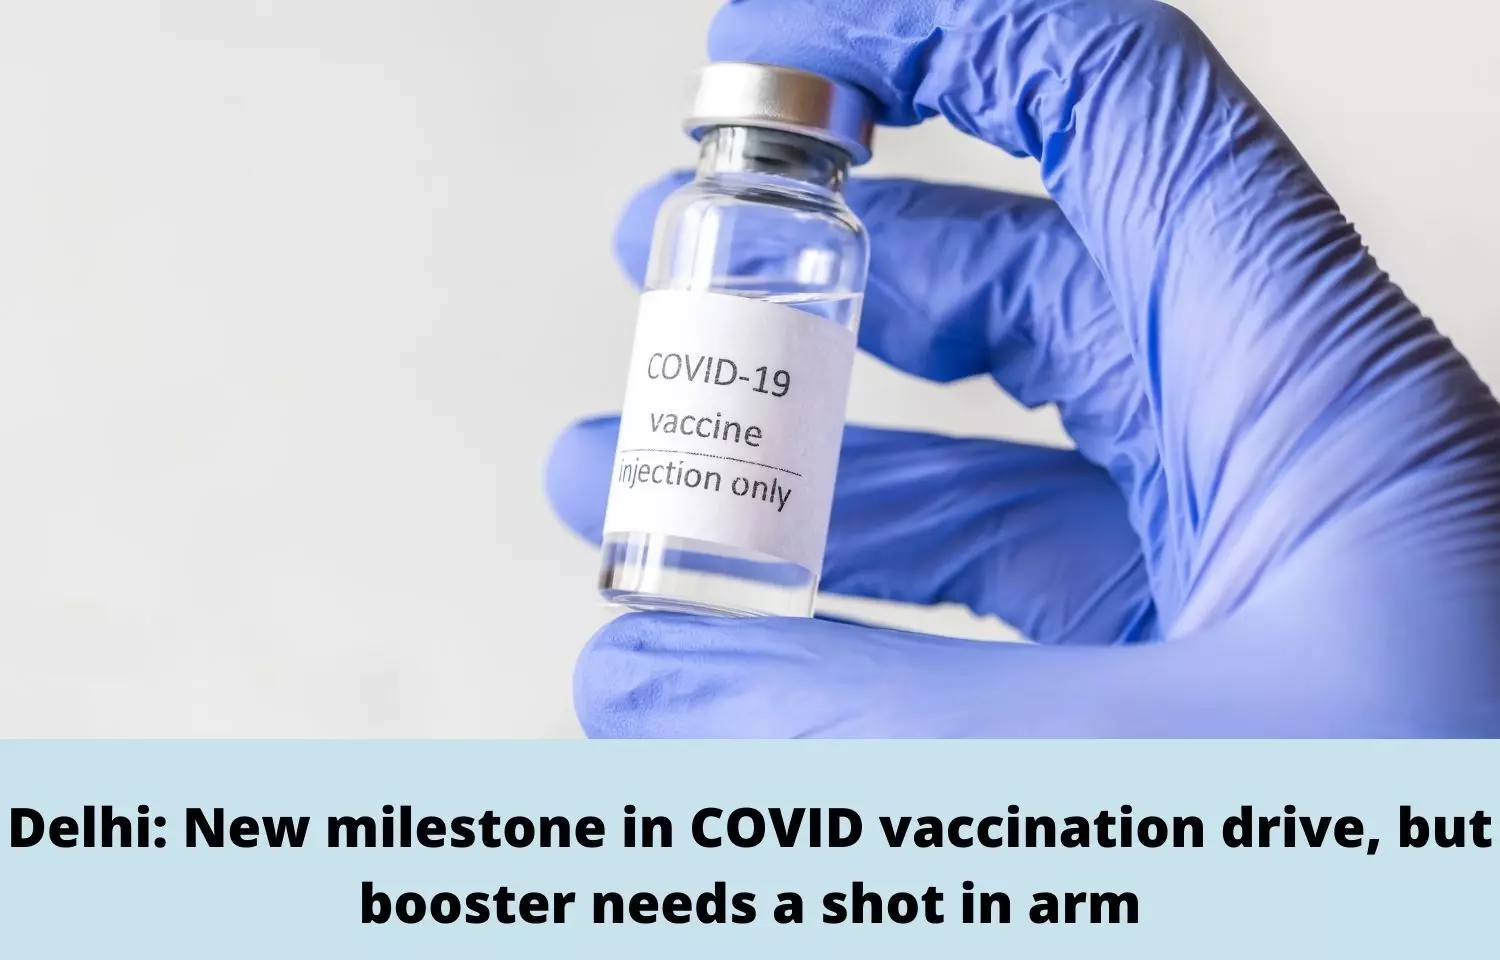 Delhi: New milestone in Covid vaccination drive, but booster needs a shot in arm